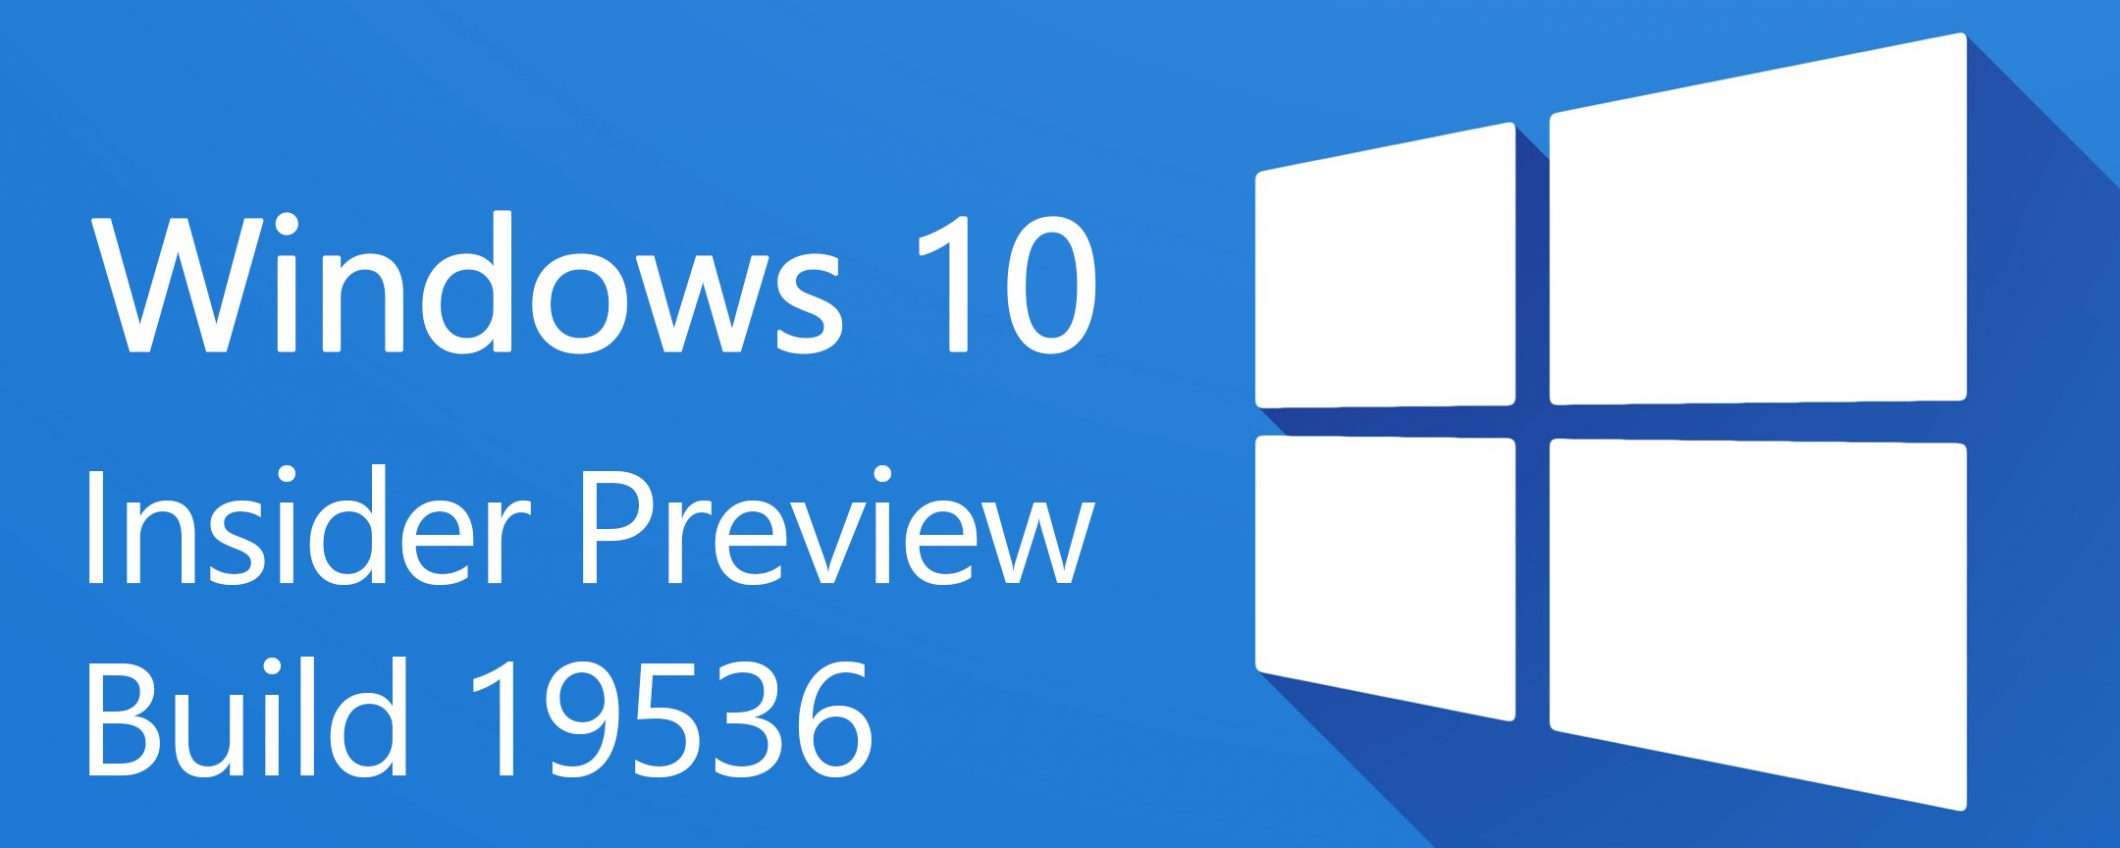 Windows 10 Insider Preview Build 19536: post-20H1